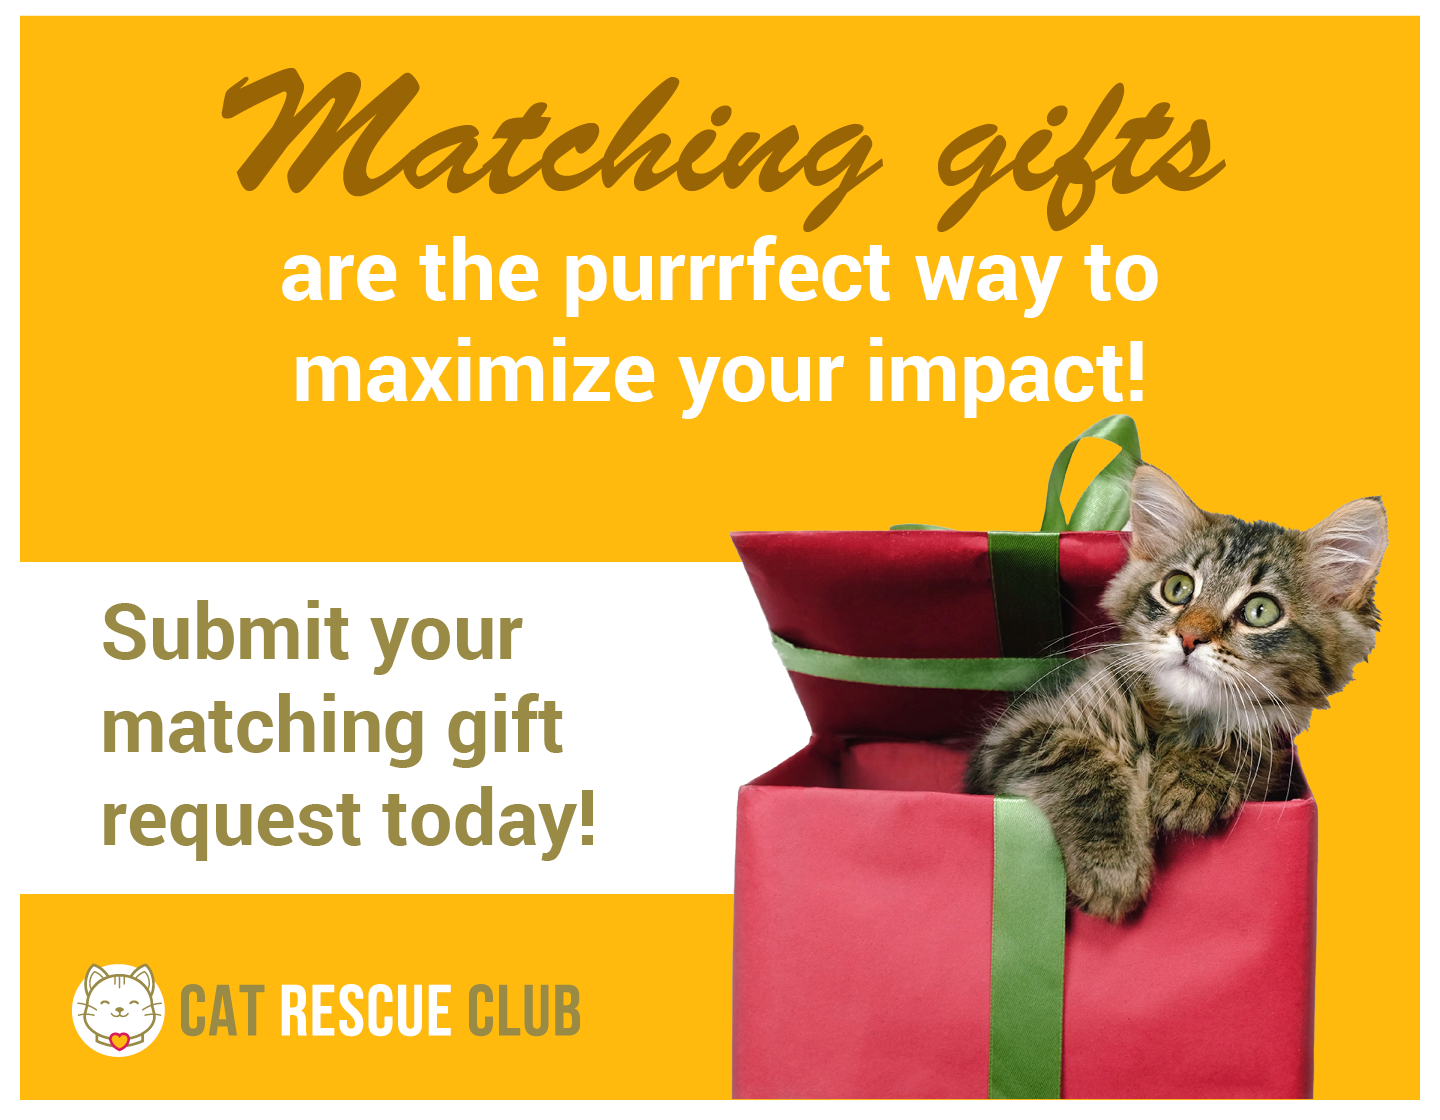 An example fundraising eCard from the fictional nonprofit Cat Rescue Club that is promoting matching gifts